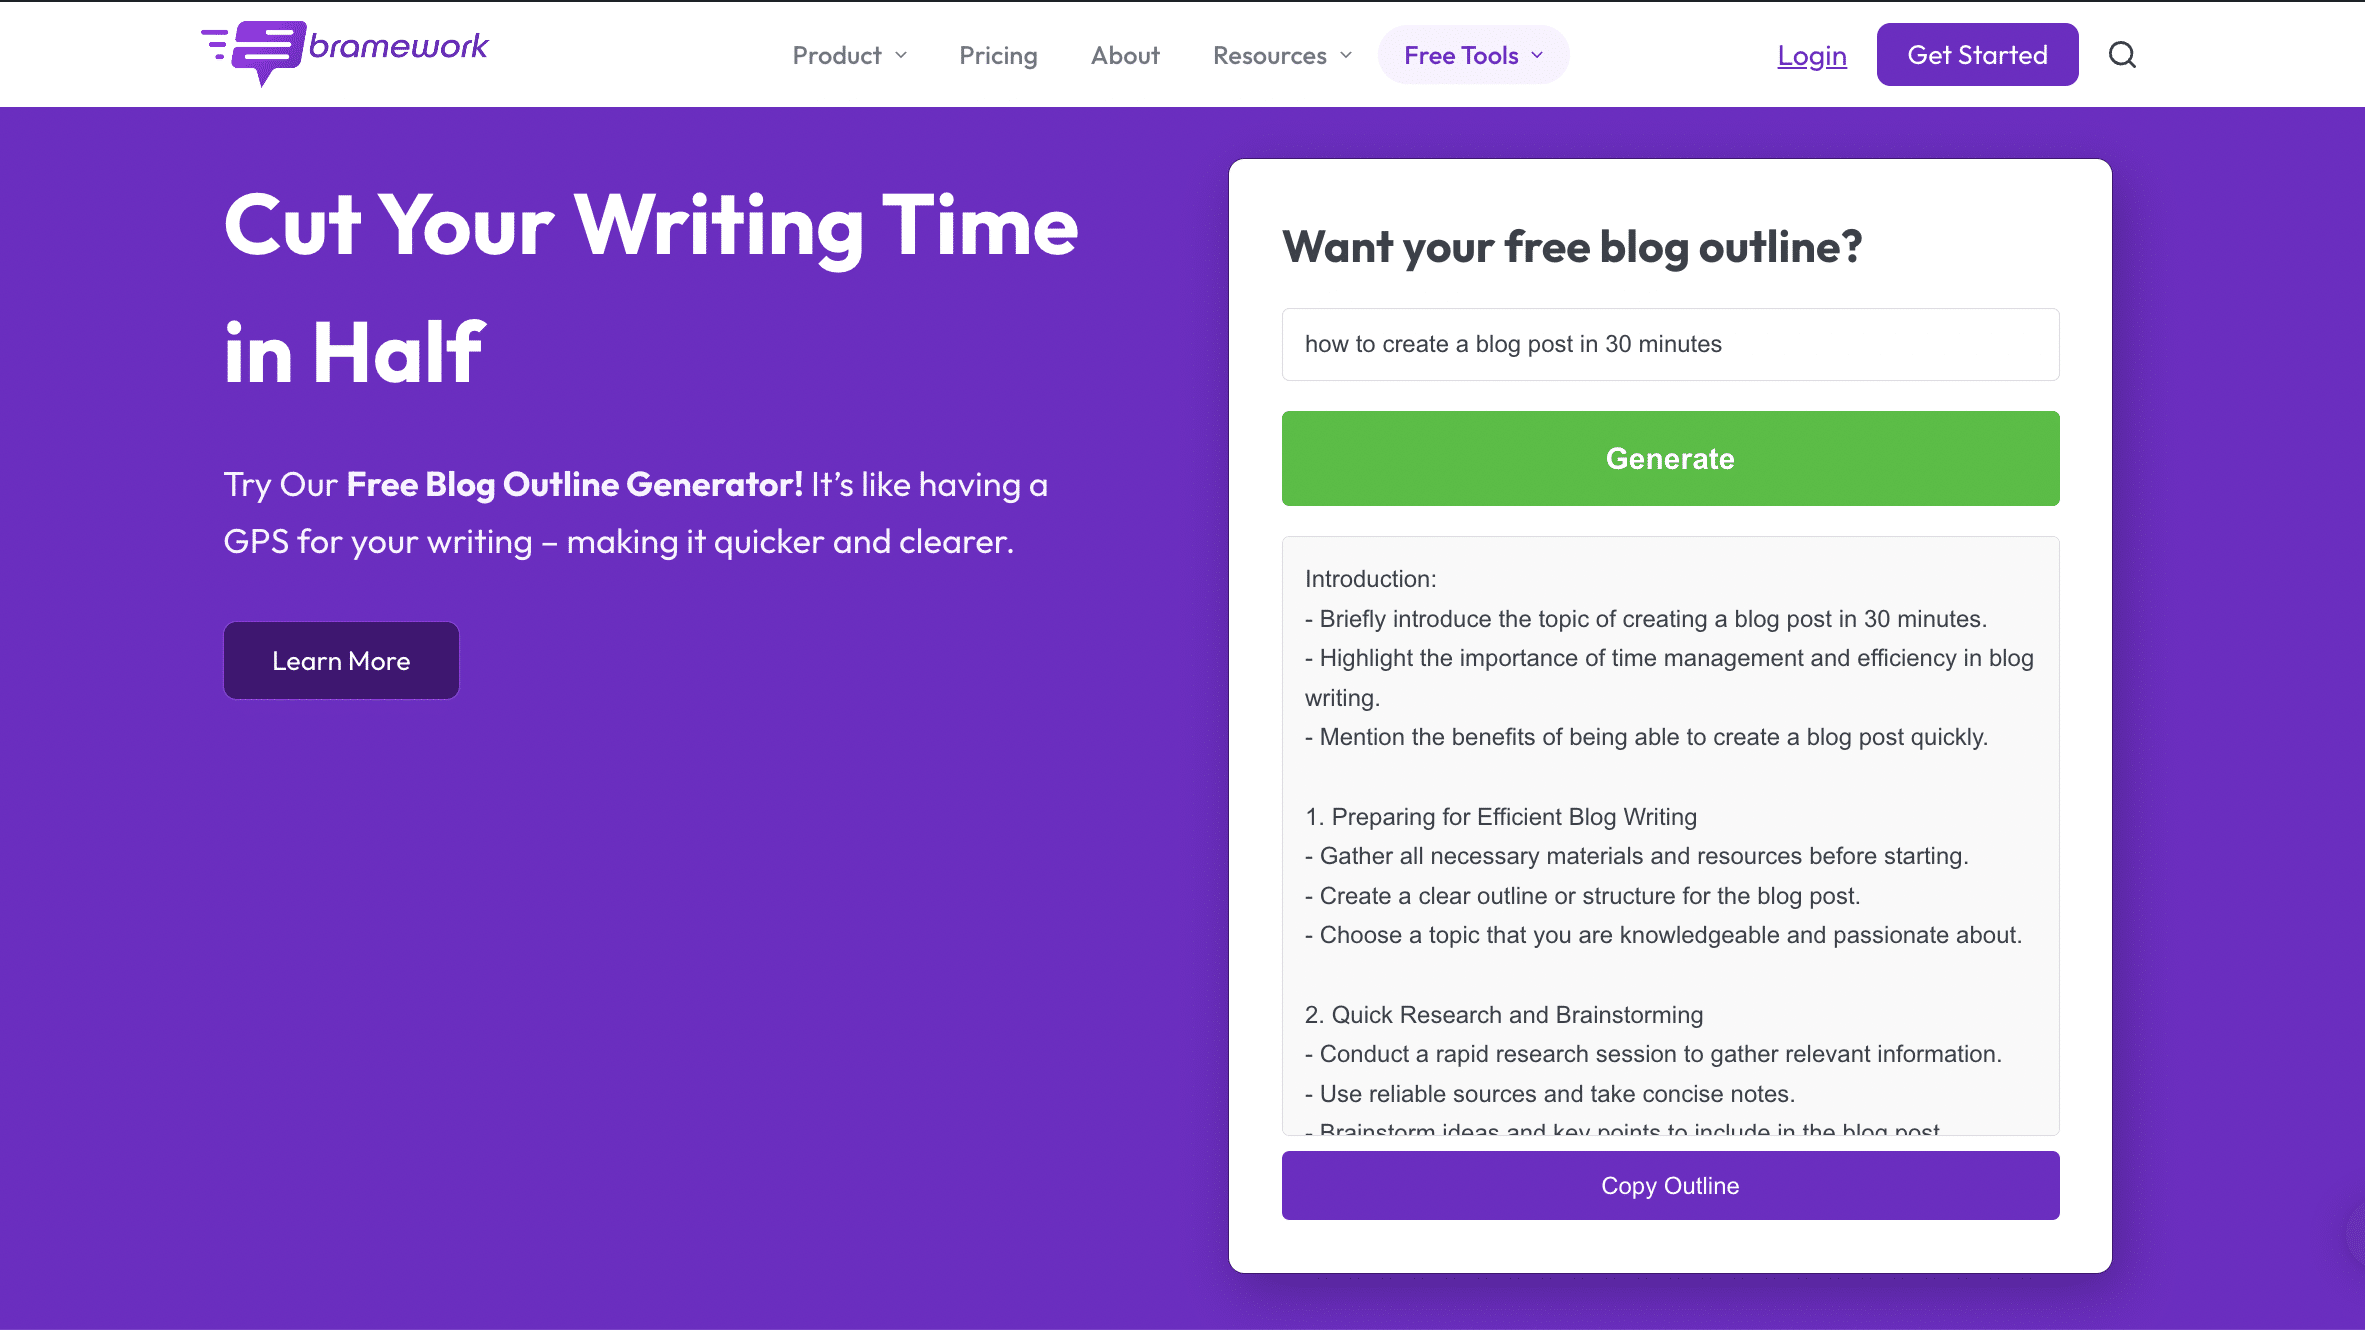 Bramework AI blog outline tool that will help you write a blog post quickly. Click here to learn how to write a blog post in 30 minutes.